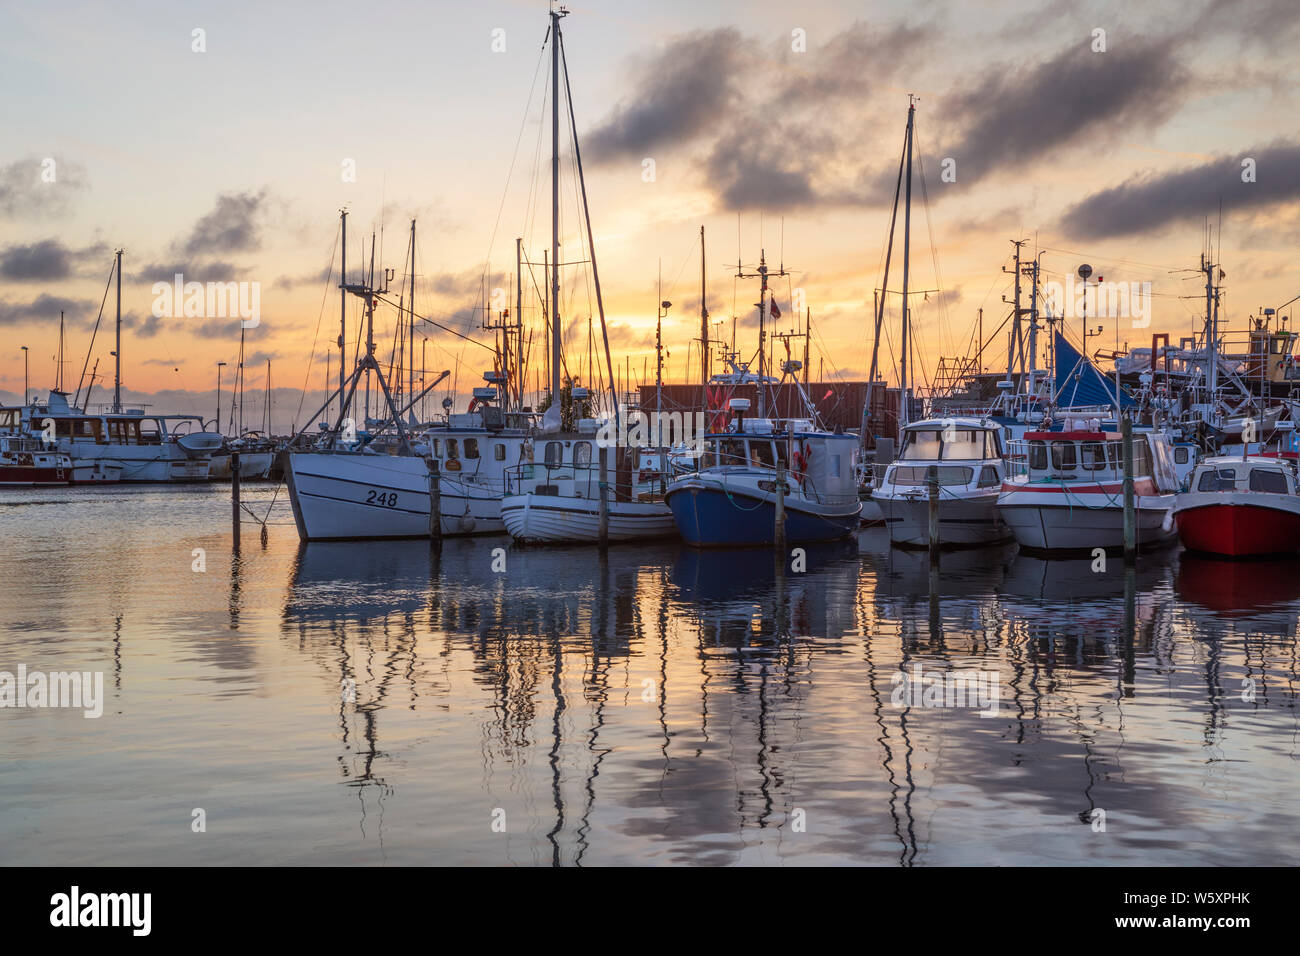 Fishing boats and yachts in the fishing harbour at sunrise, Gilleleje, Region Hovedstaden, Zealand, Denmark, Europe Stock Photo